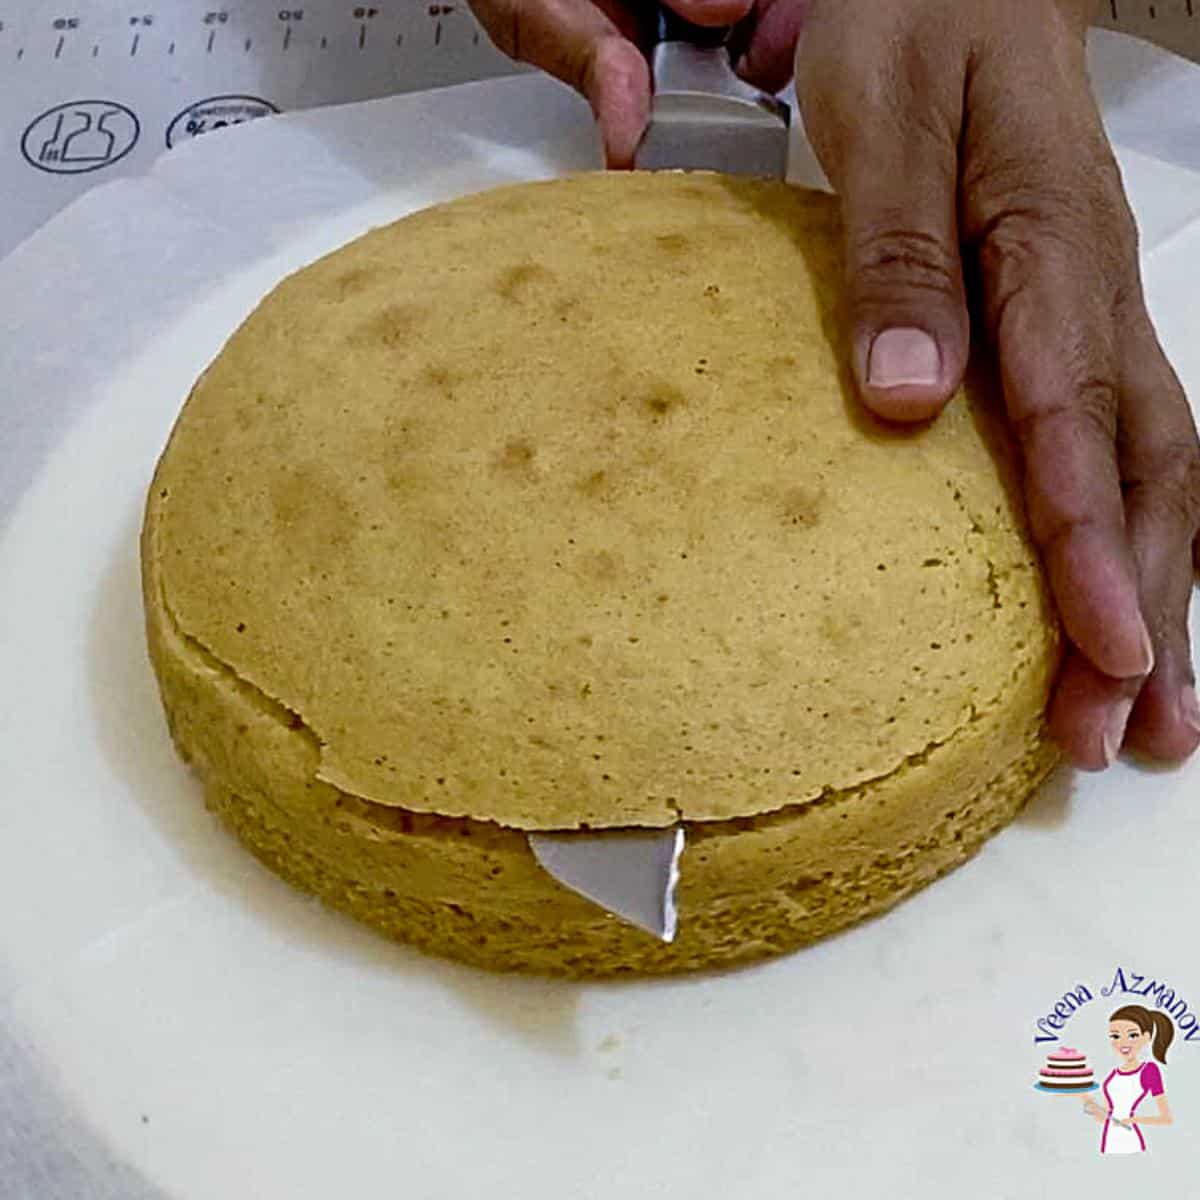 Cut the dome of the cakes.